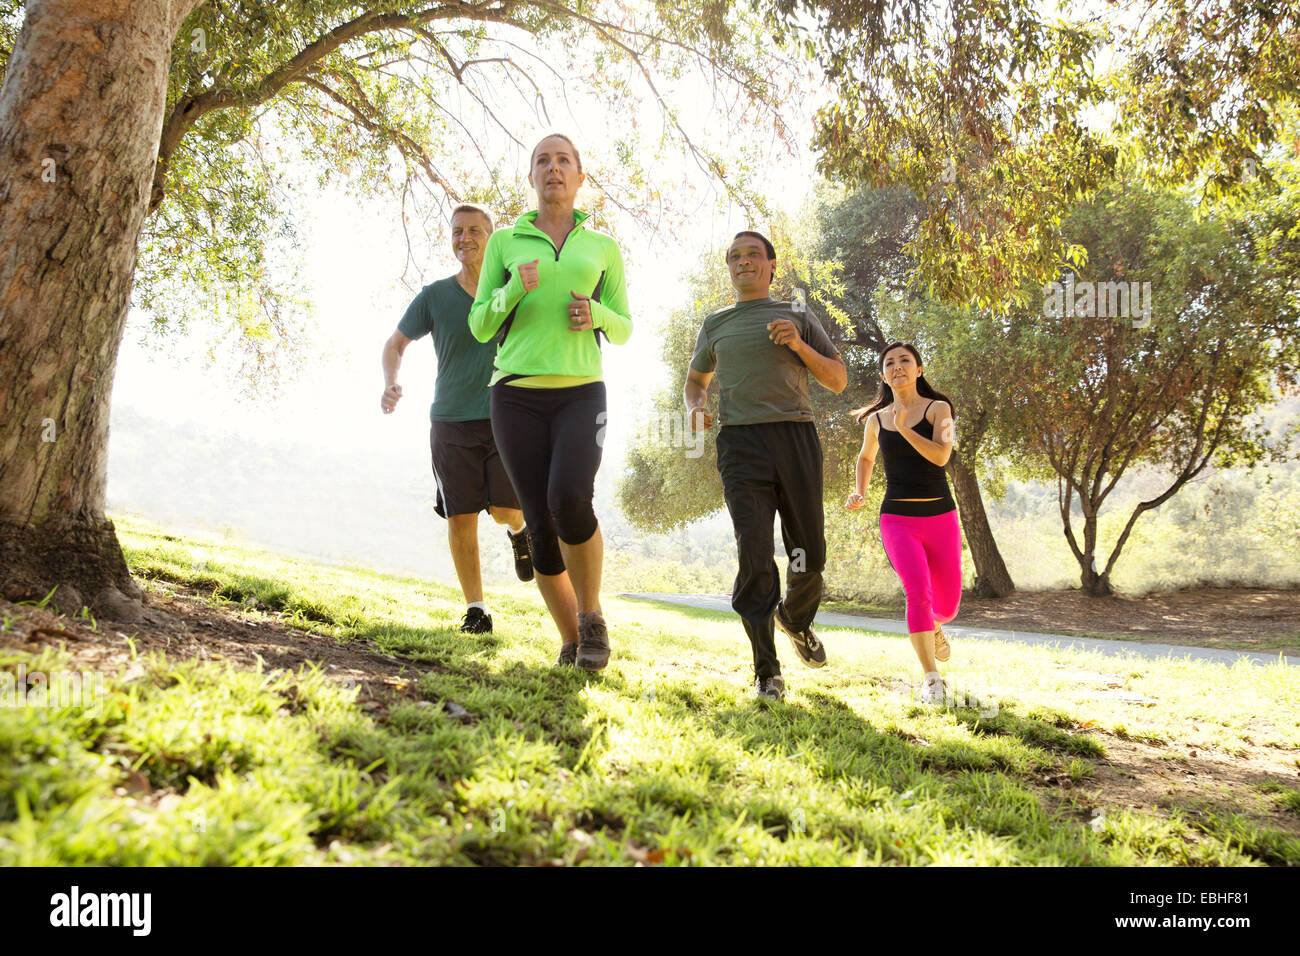 Four mature men and women running in park Stock Photo